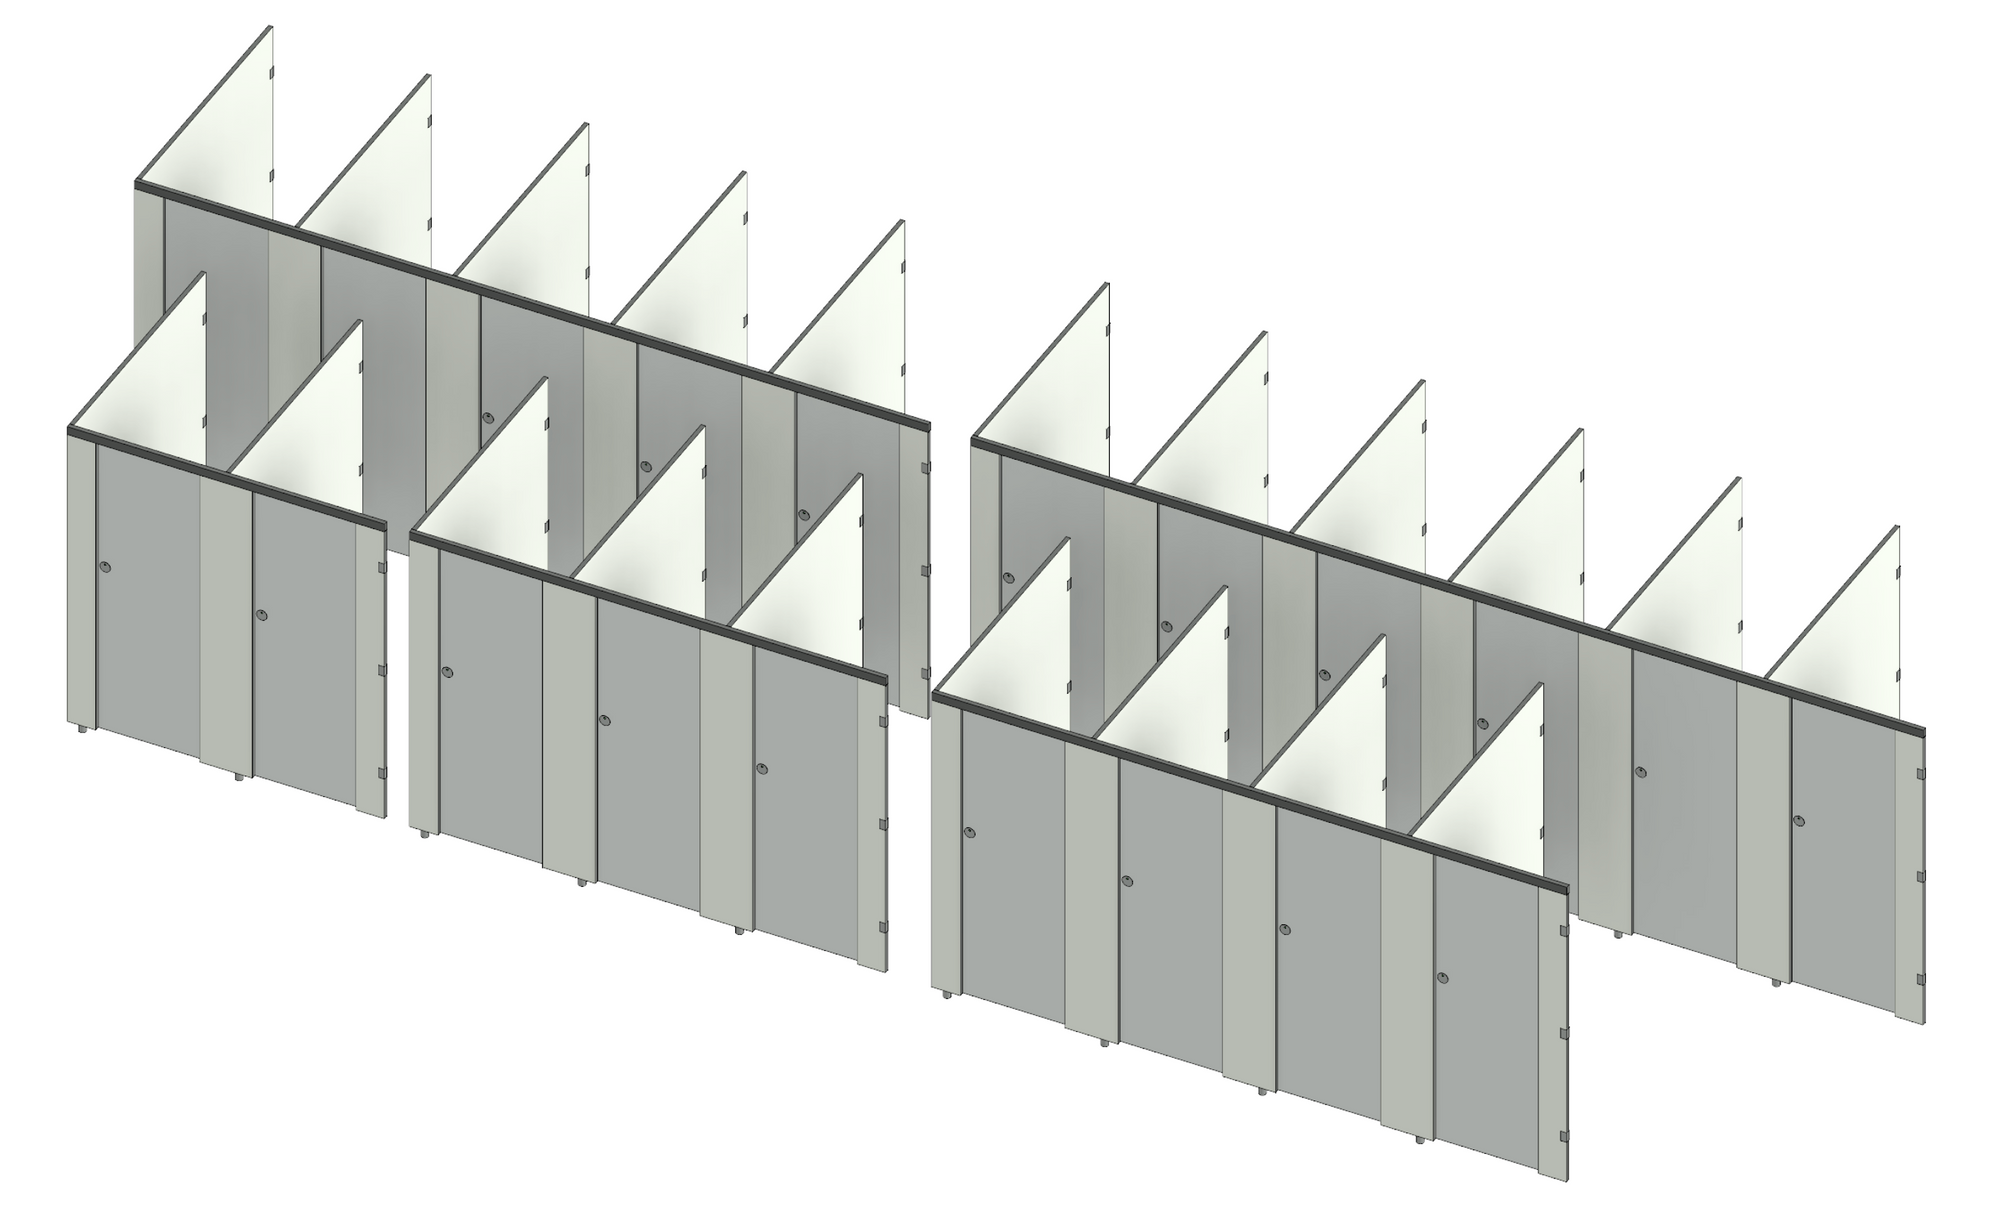 Revit 3D view showing bathroom stall arrays from two to six cubicles.